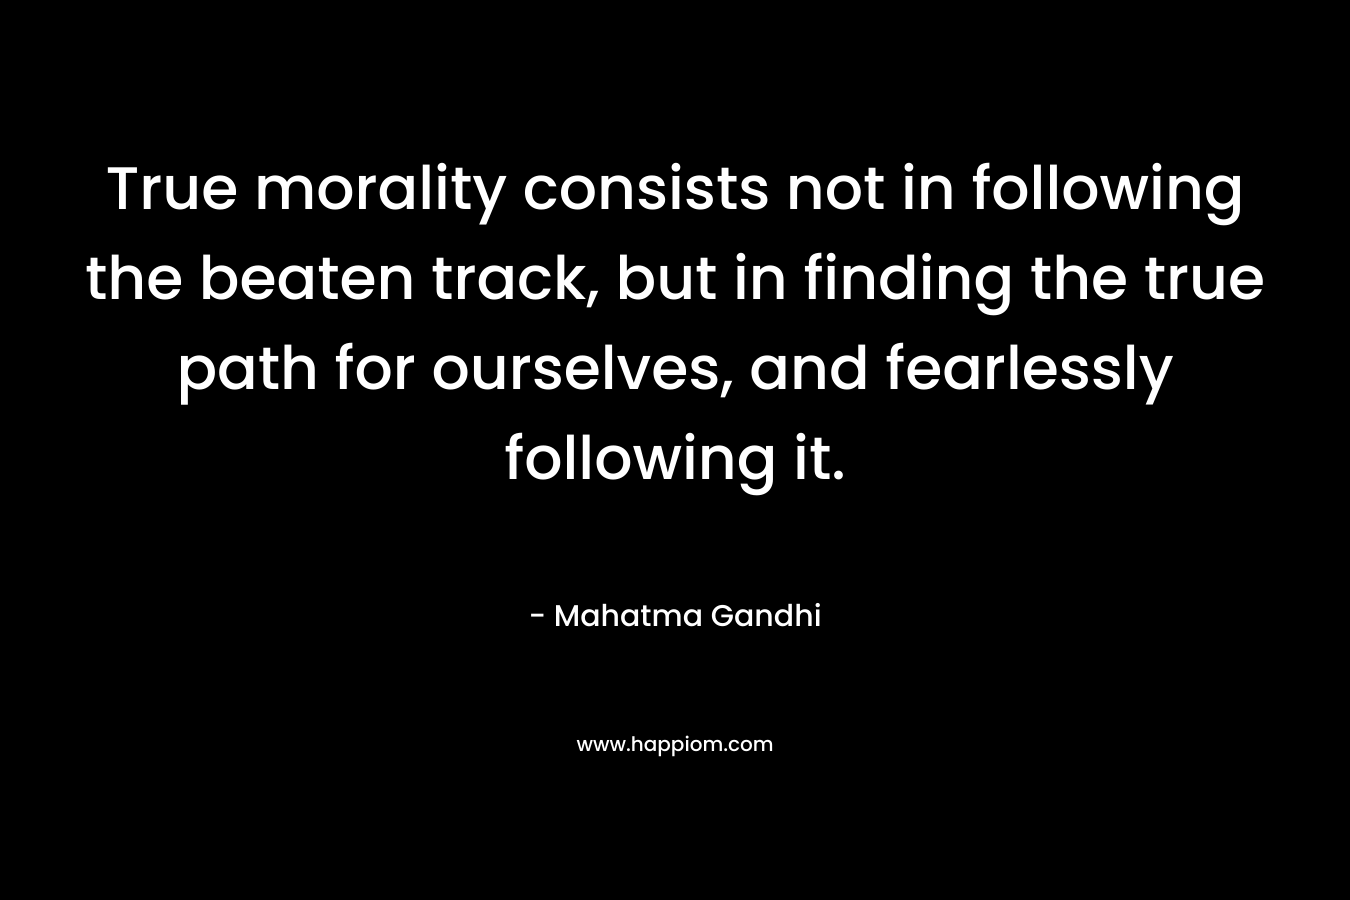 True morality consists not in following the beaten track, but in finding the true path for ourselves, and fearlessly following it. – Mahatma Gandhi